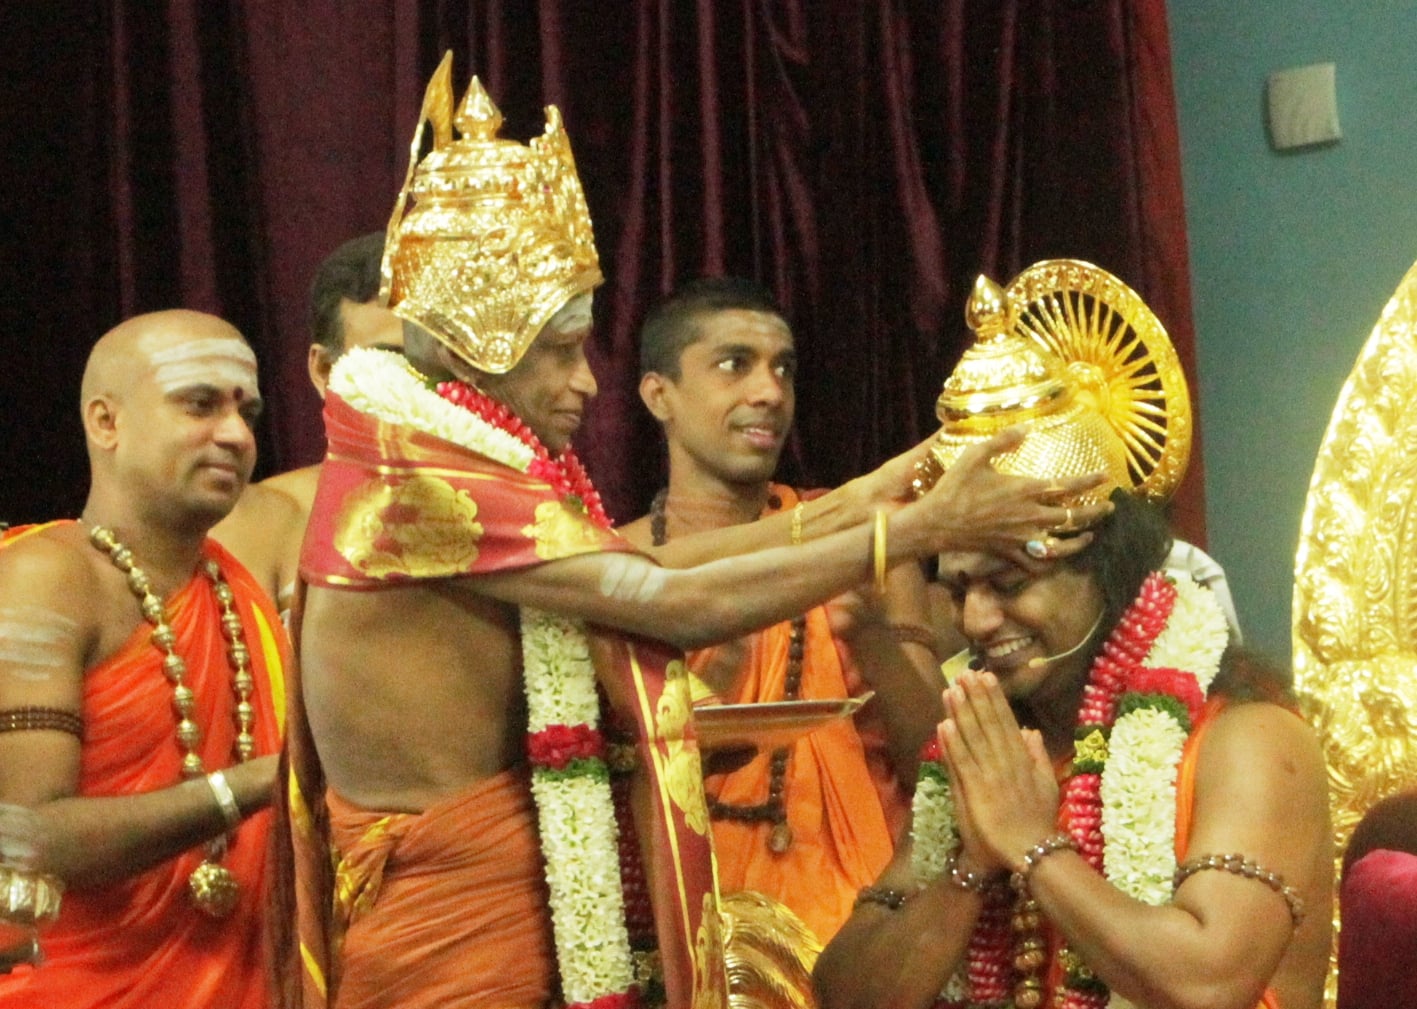 There is no place here for Nithyananda